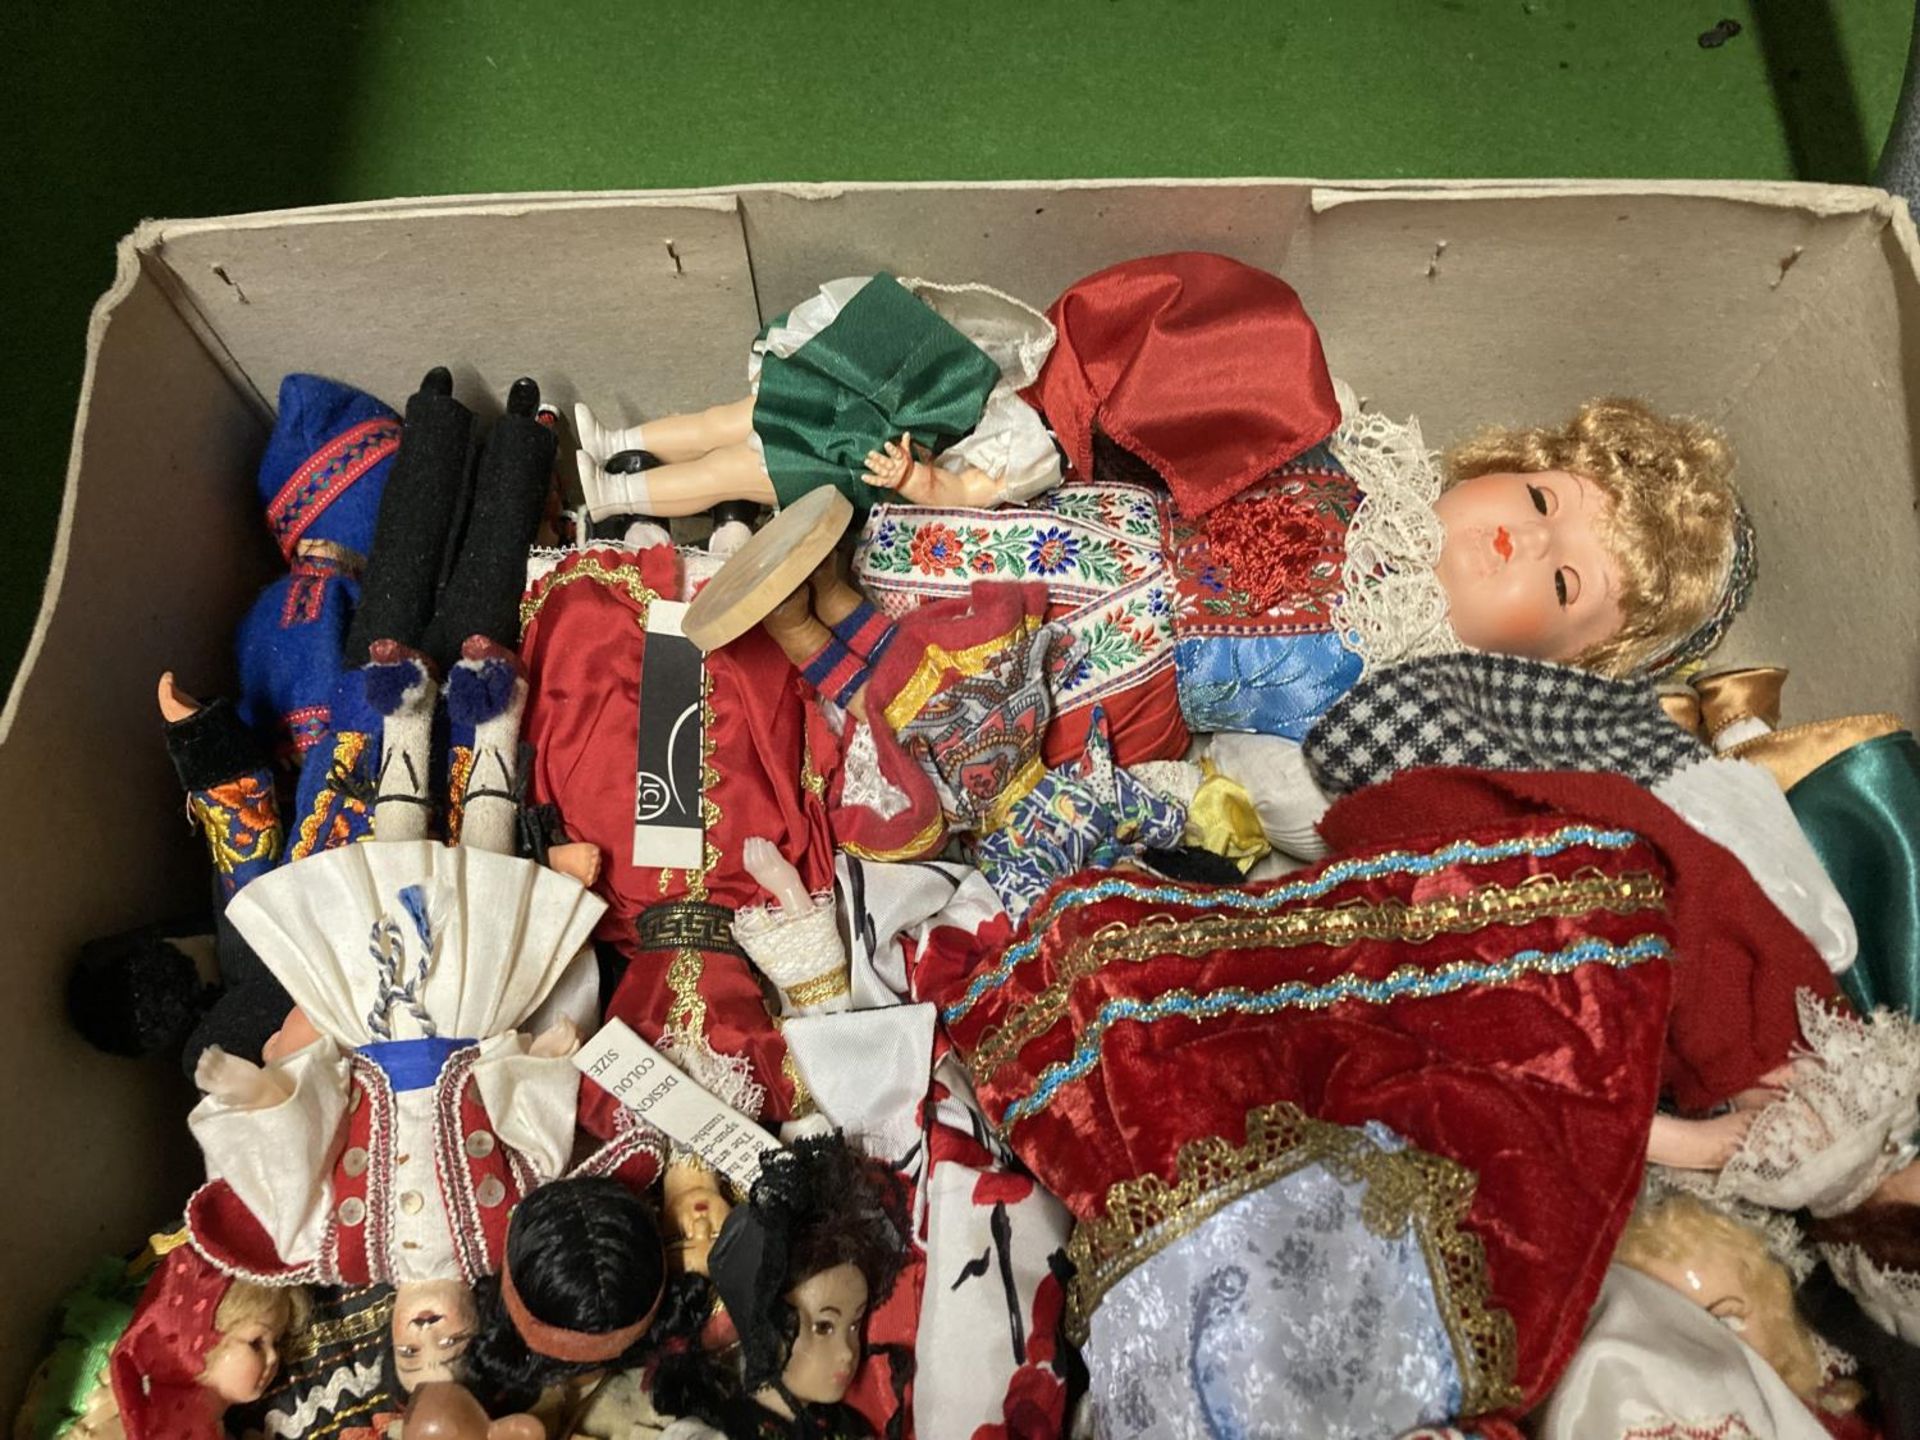 A LARGE COLLECTION OF DOLLS FROM AROUND THE WORLD - Image 4 of 4